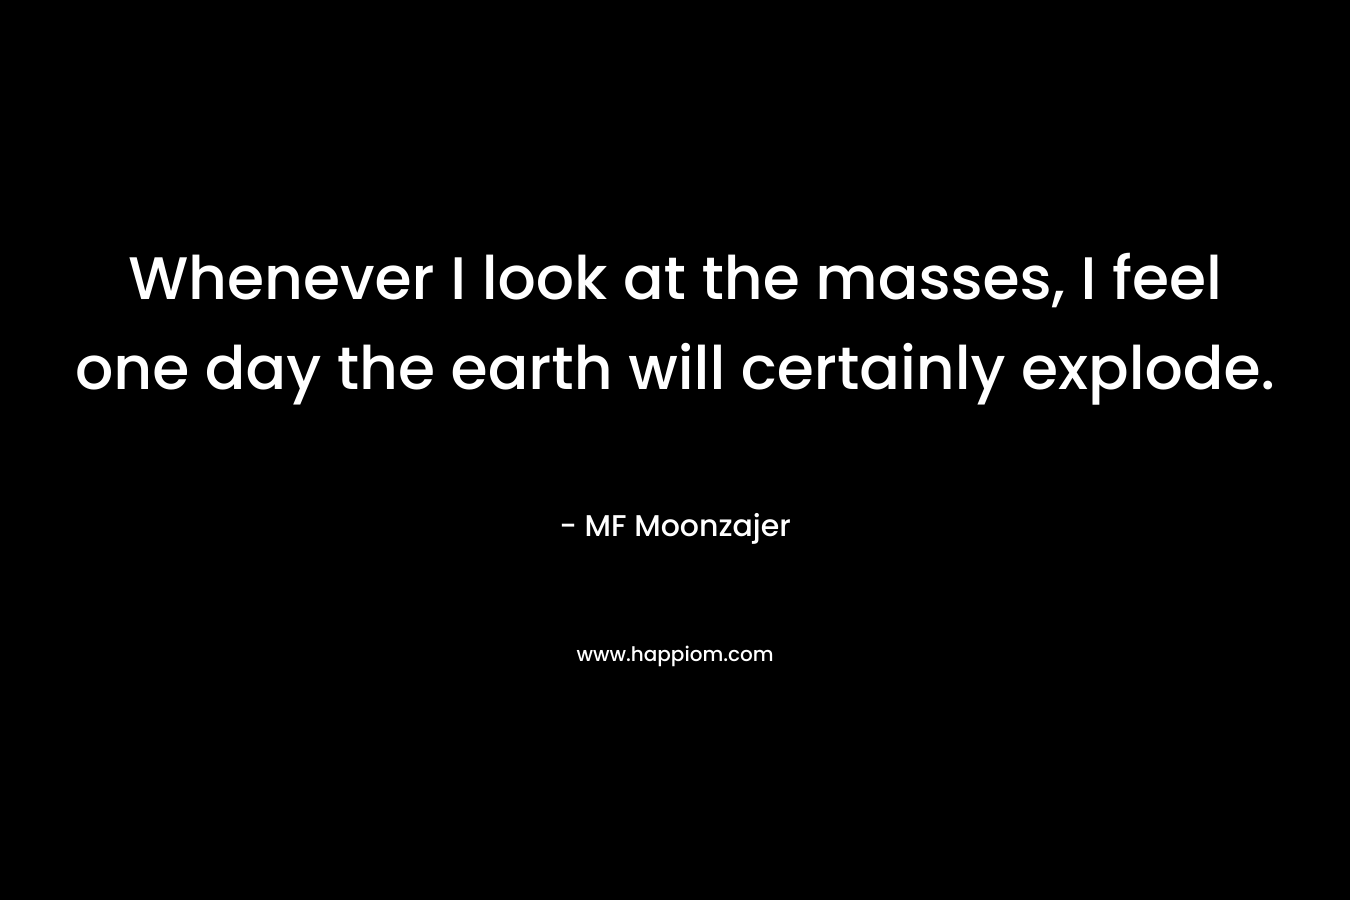 Whenever I look at the masses, I feel one day the earth will certainly explode.